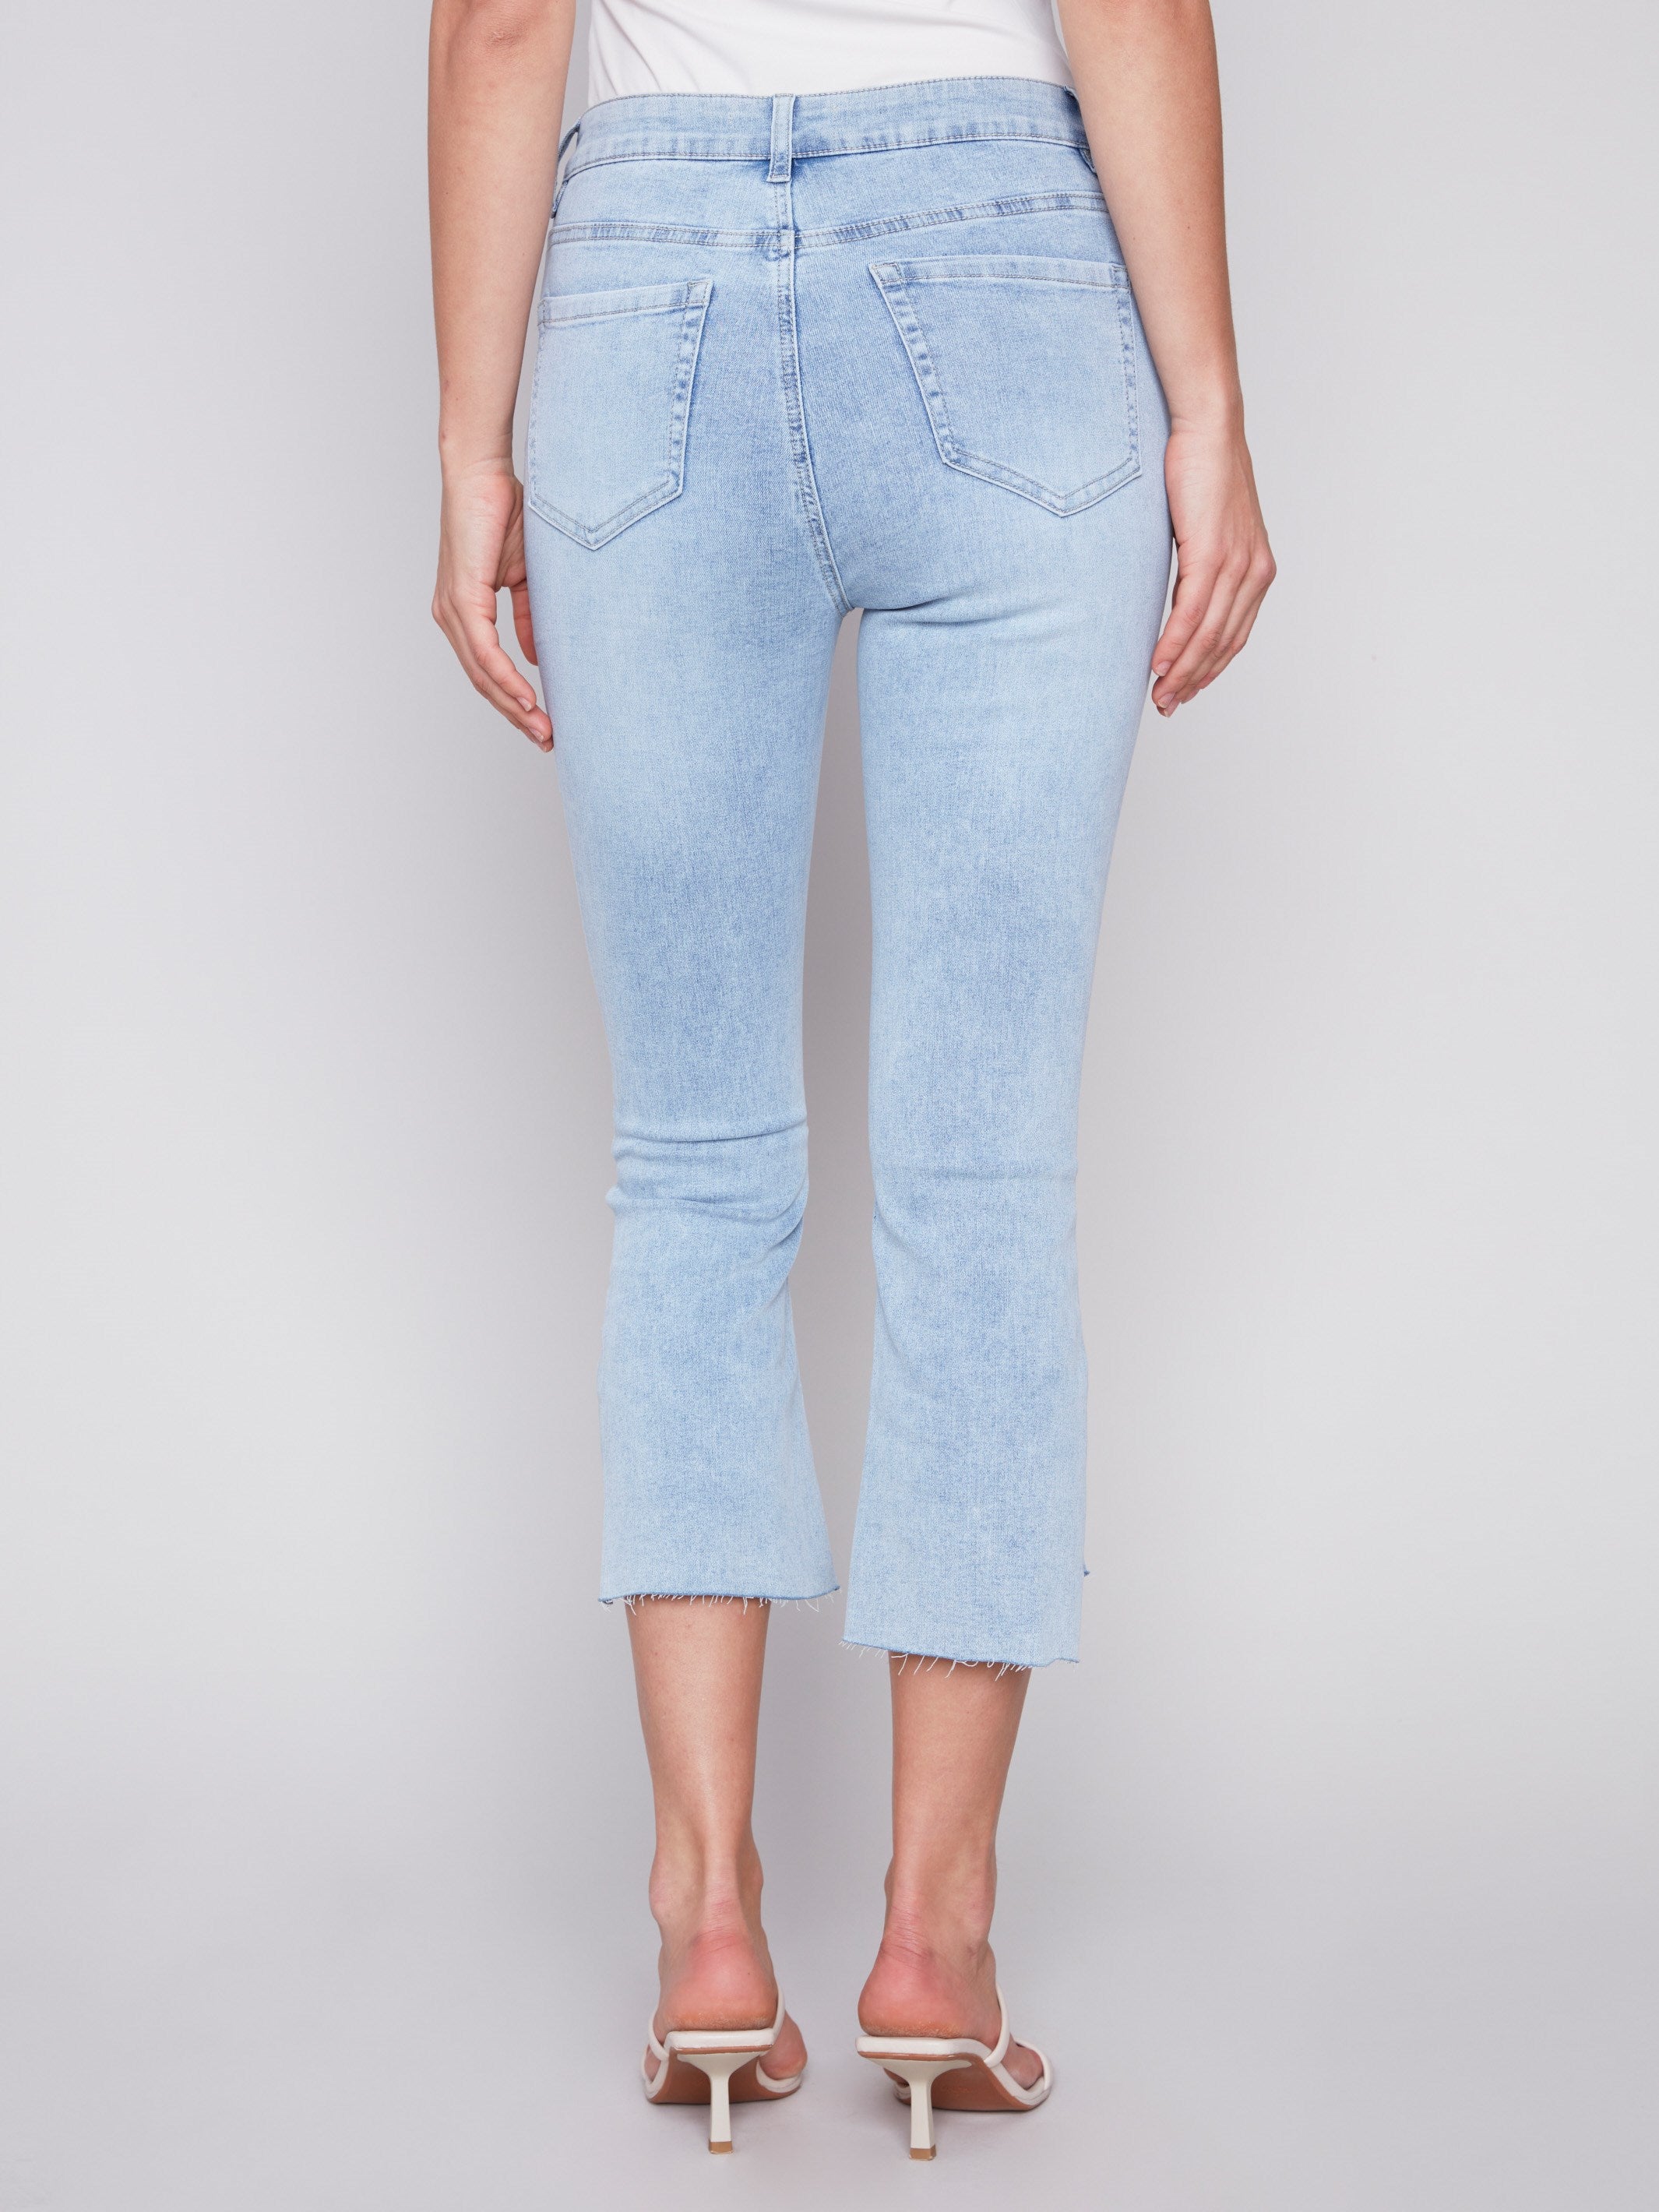 Cropped Bootcut Jeans with Asymmetrical Hem - Bleach Blue - Charlie B Collection Canada - Image 3